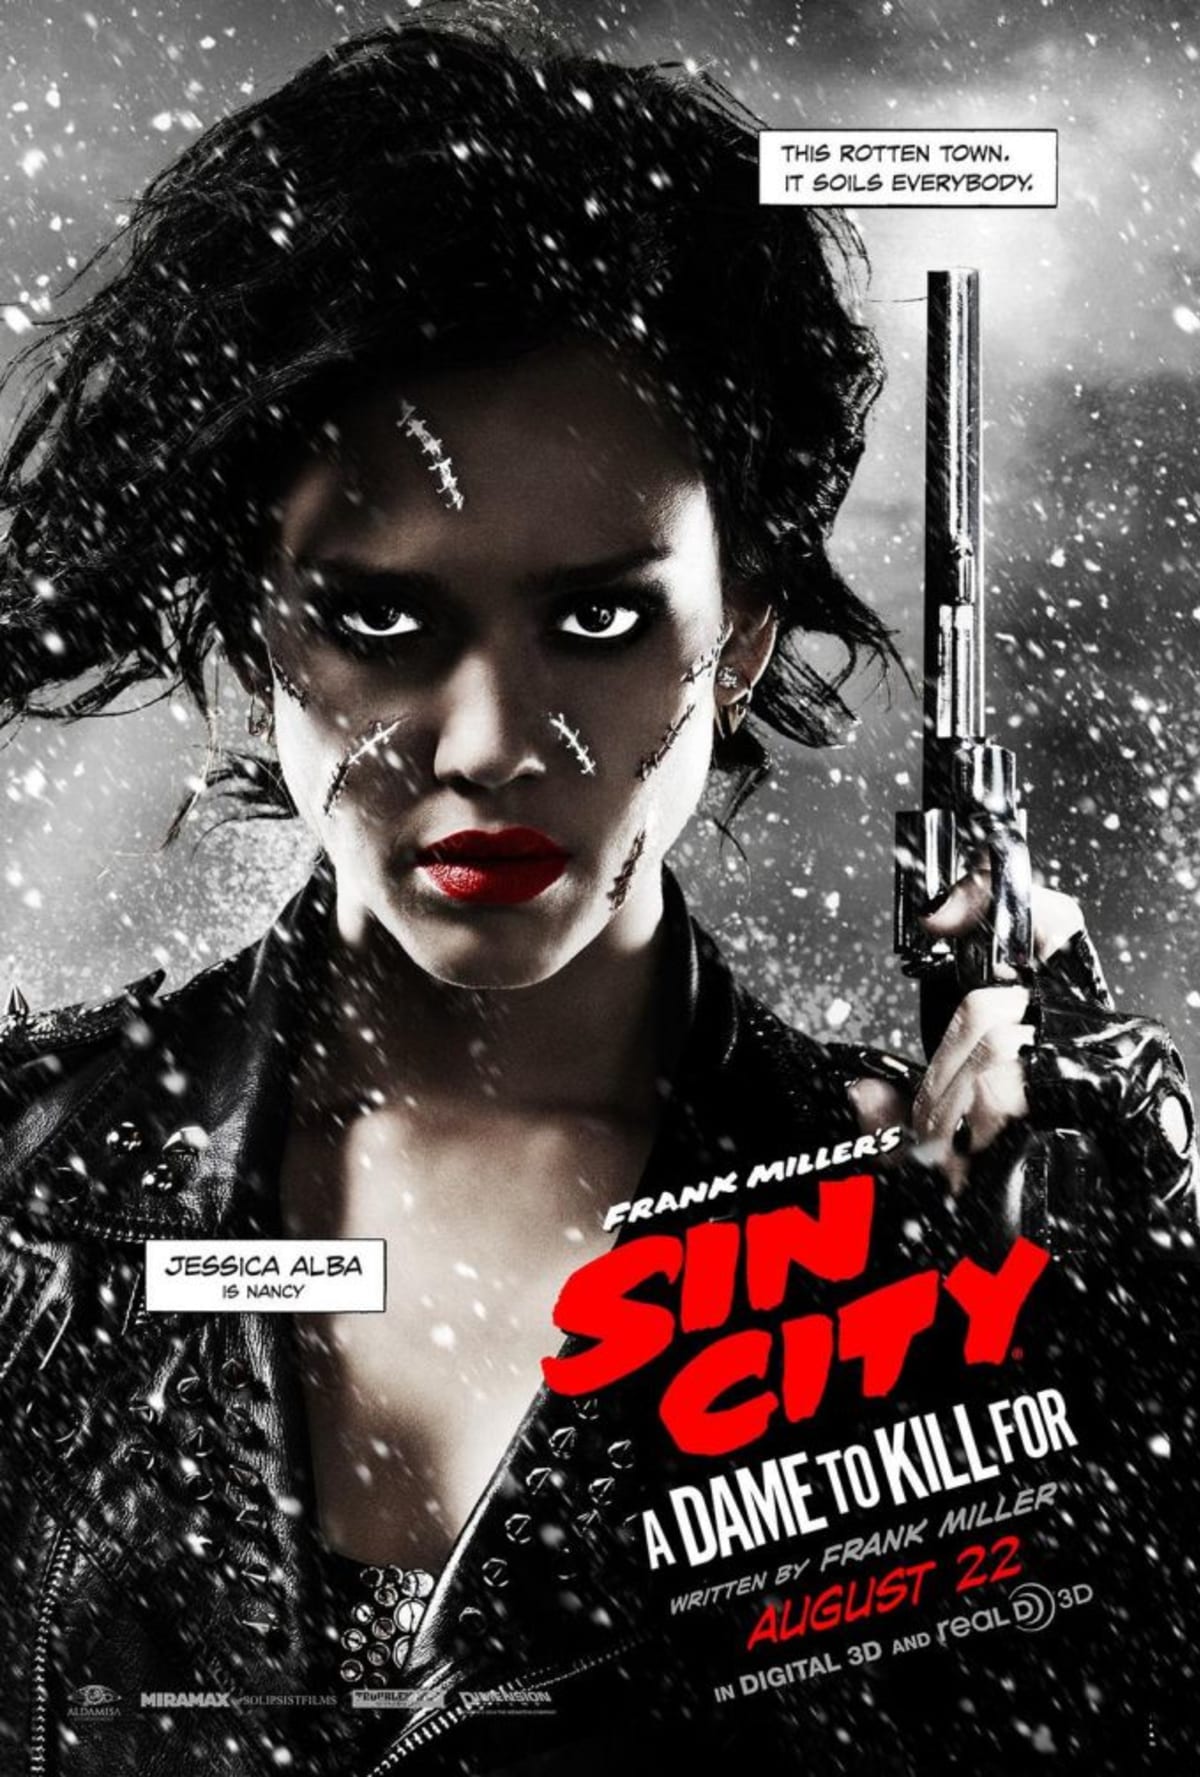 Jessica Alba Is Very Intimidating In The New Sin City